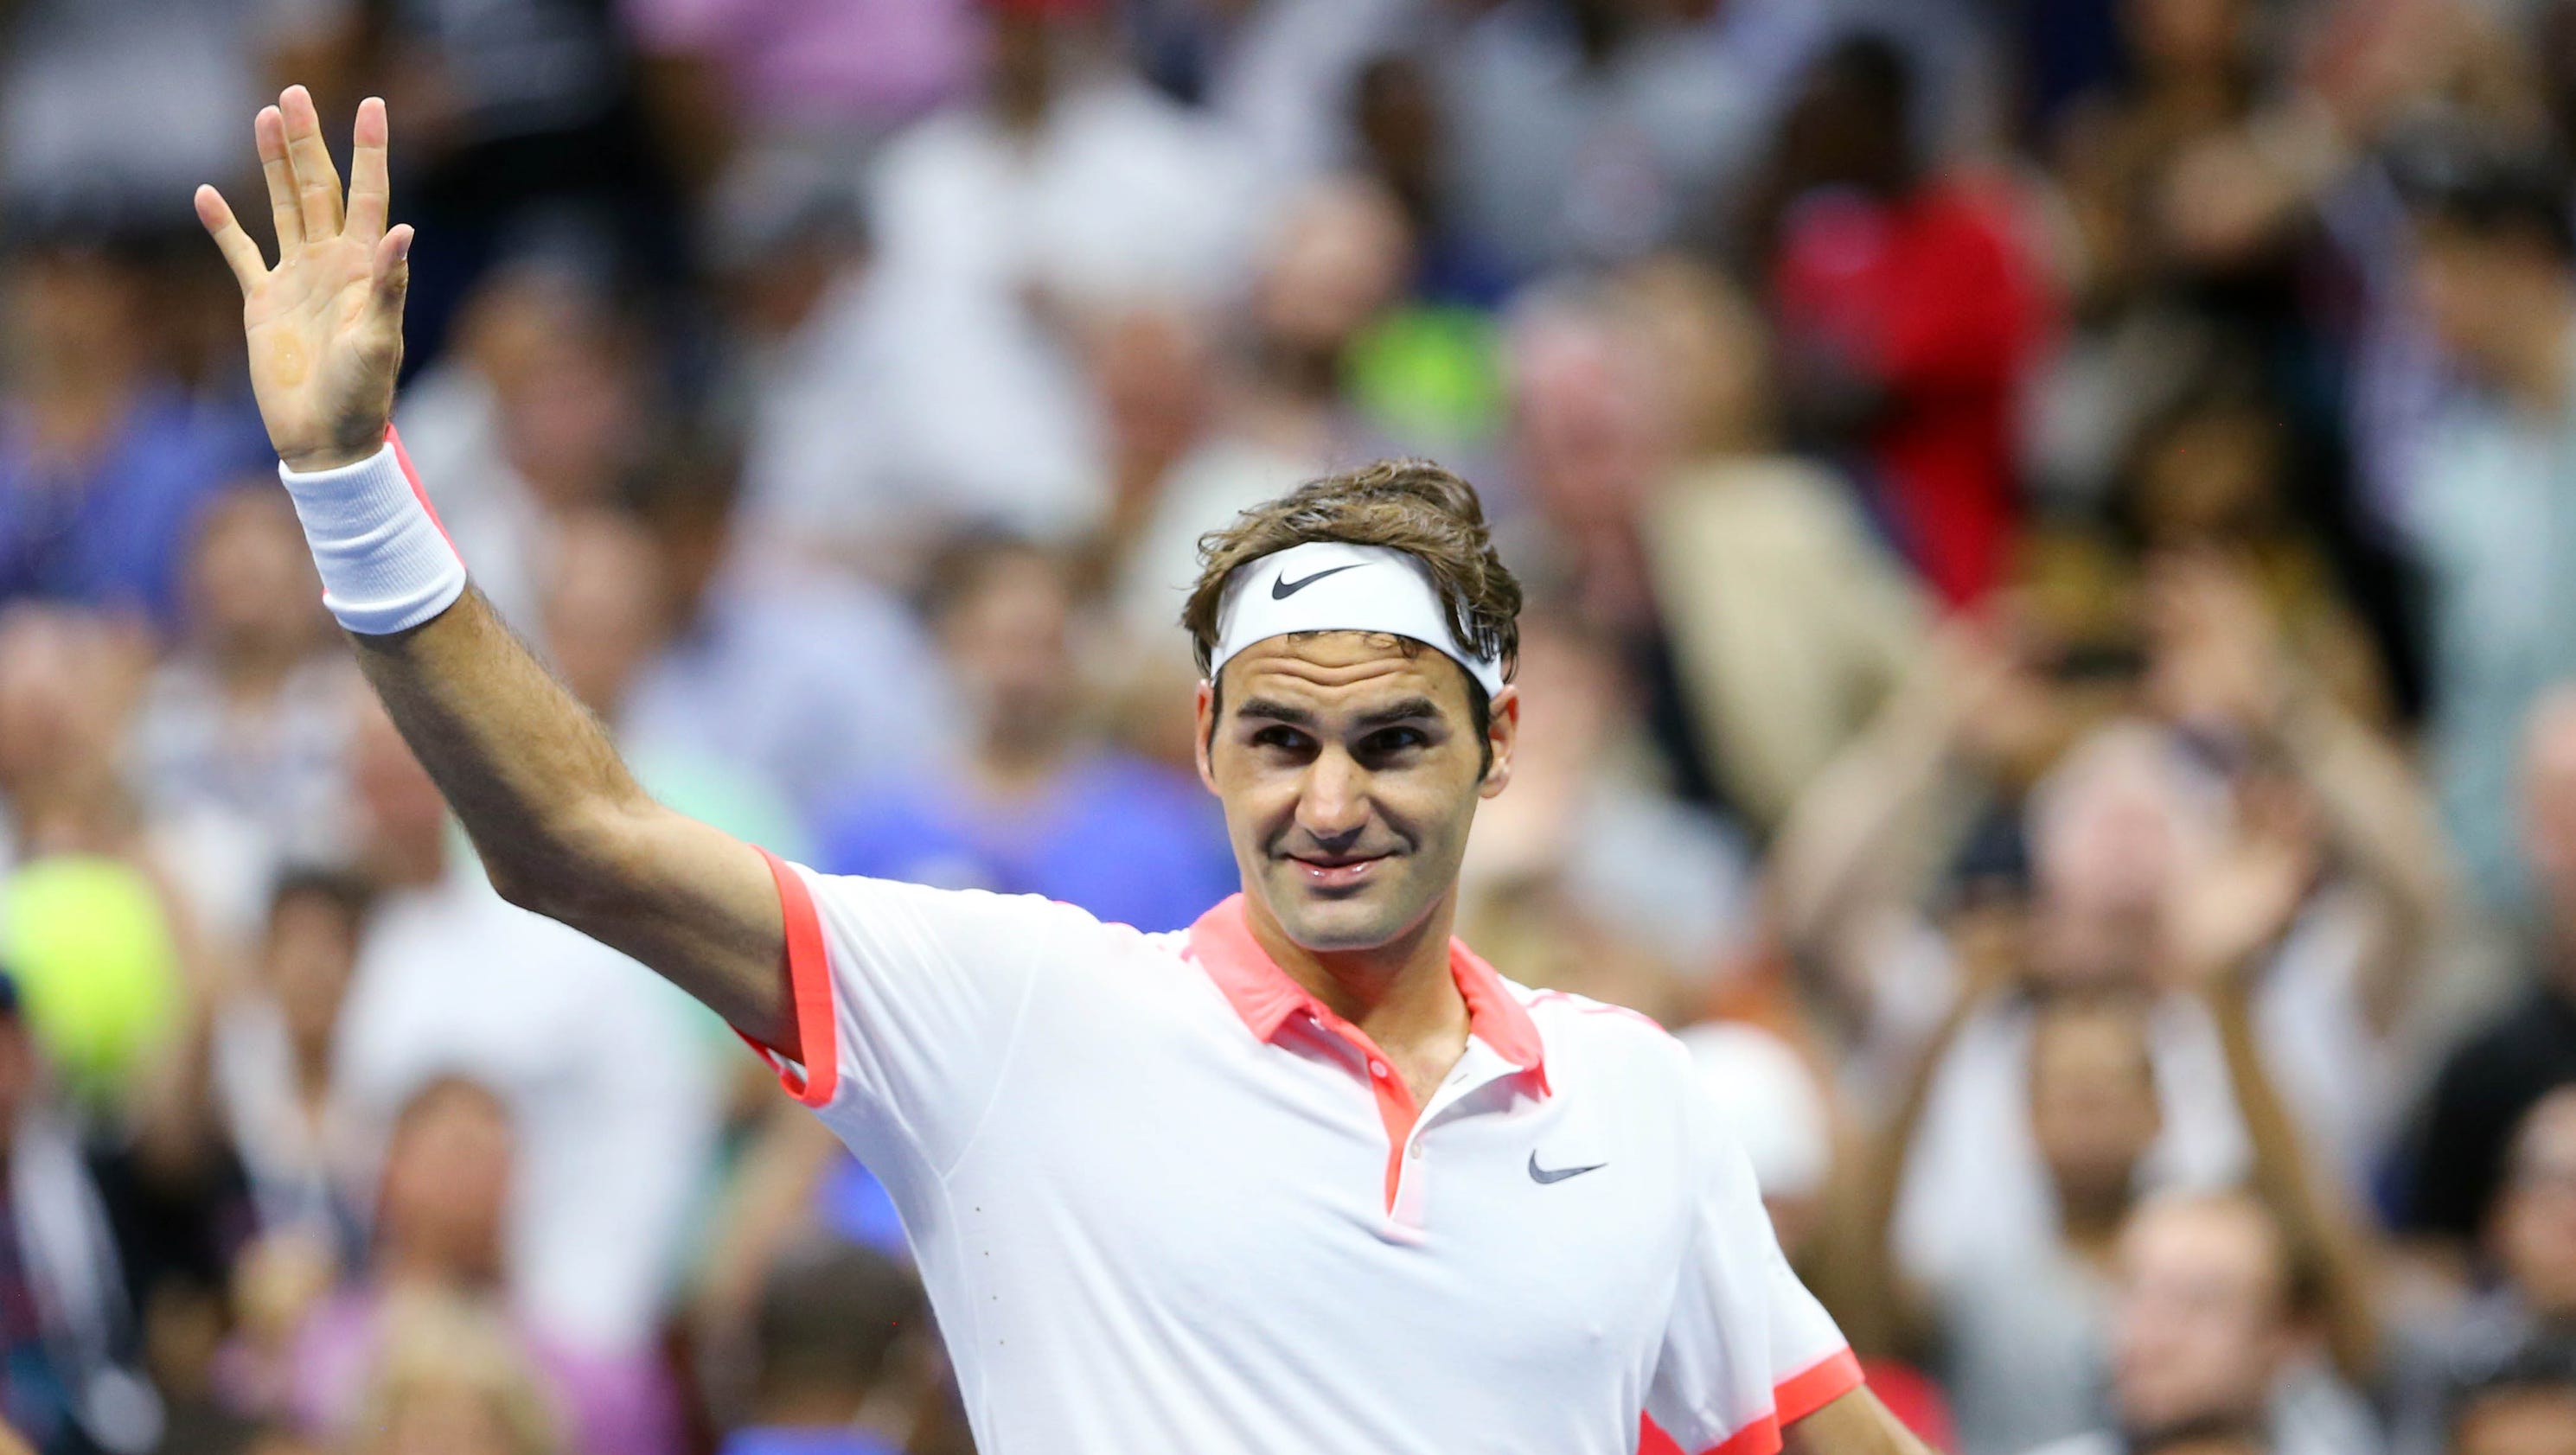 Roger Federer beats John Isner in electric match to advance to quarterfinals